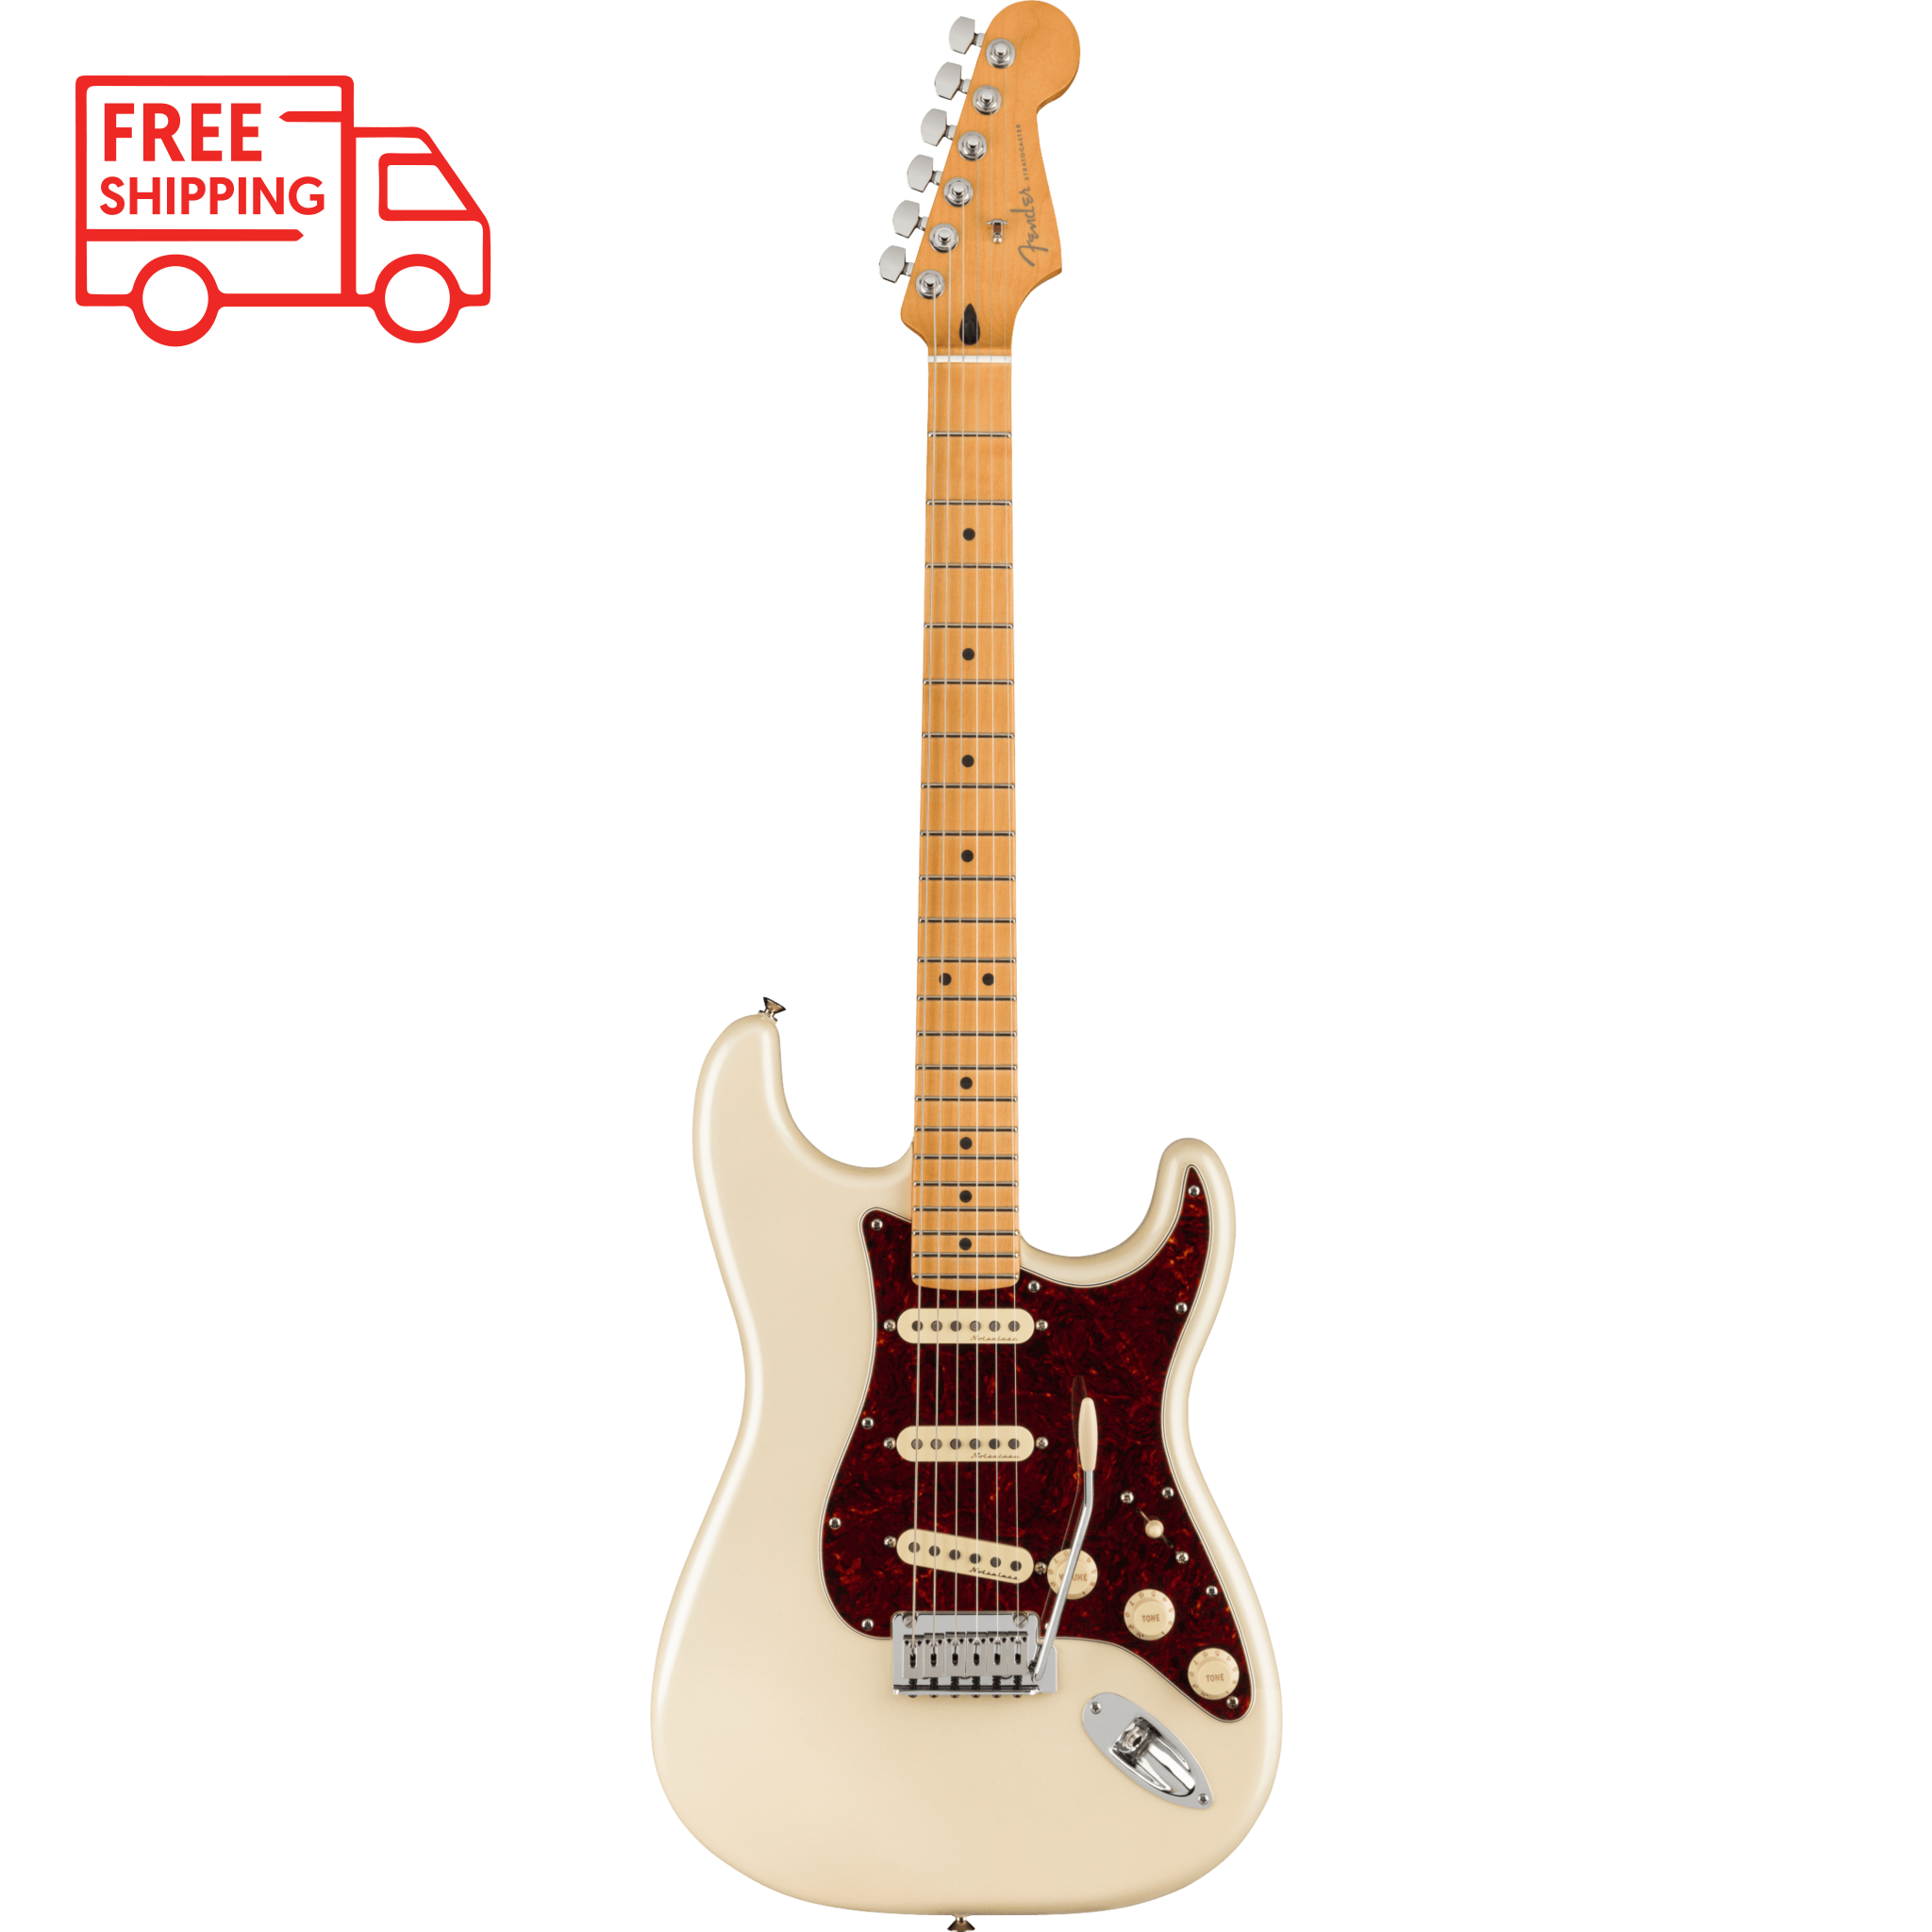 Fender Player Plus Stratocaster, Maple Fingerboard, Olympic Pearl